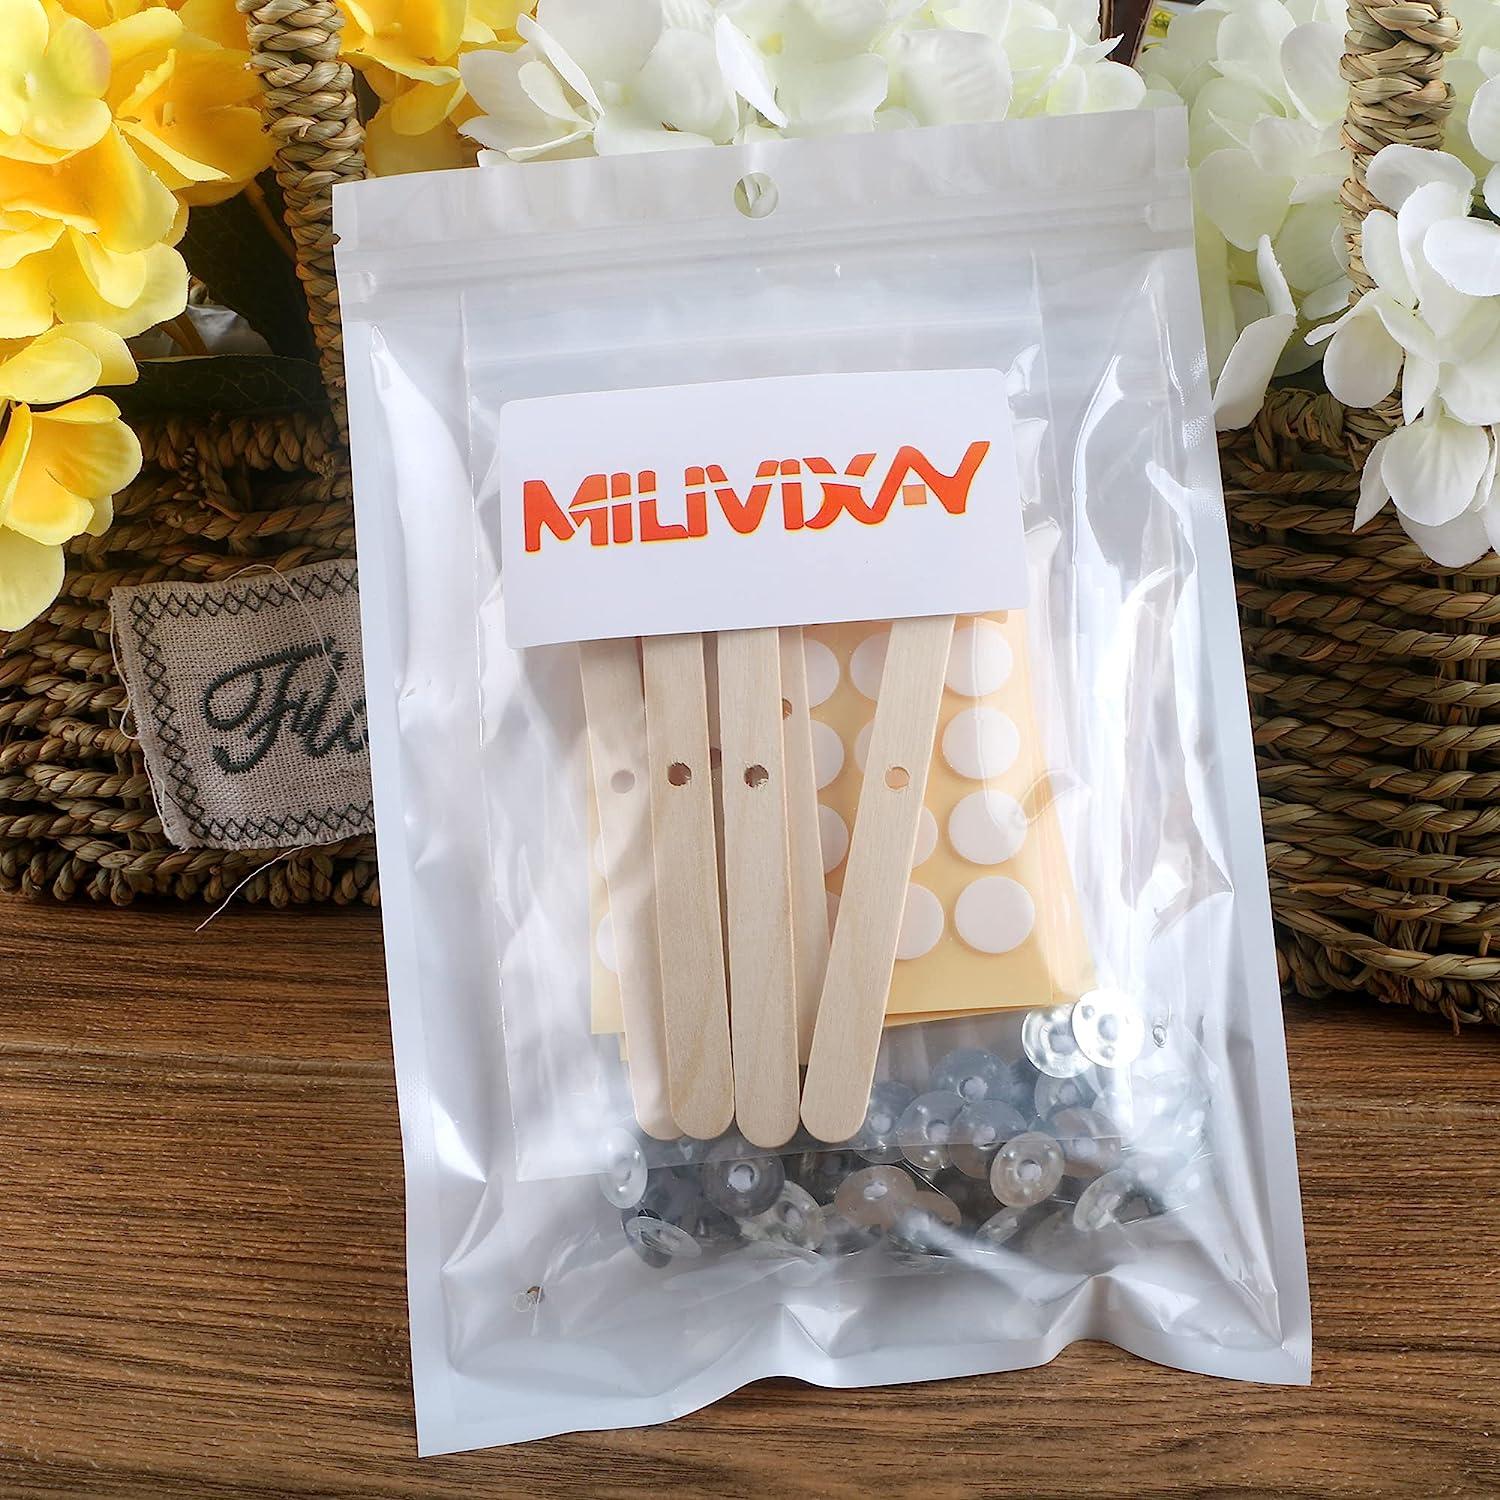 MILIVIXAY 100PCS 8 inch Candle Wicks with 100 Metal Tabs, 100PCS Candle  Wick Stickers and 6PCS Wooden Candle Wick Holders - Wicks Coated with  Paraffin